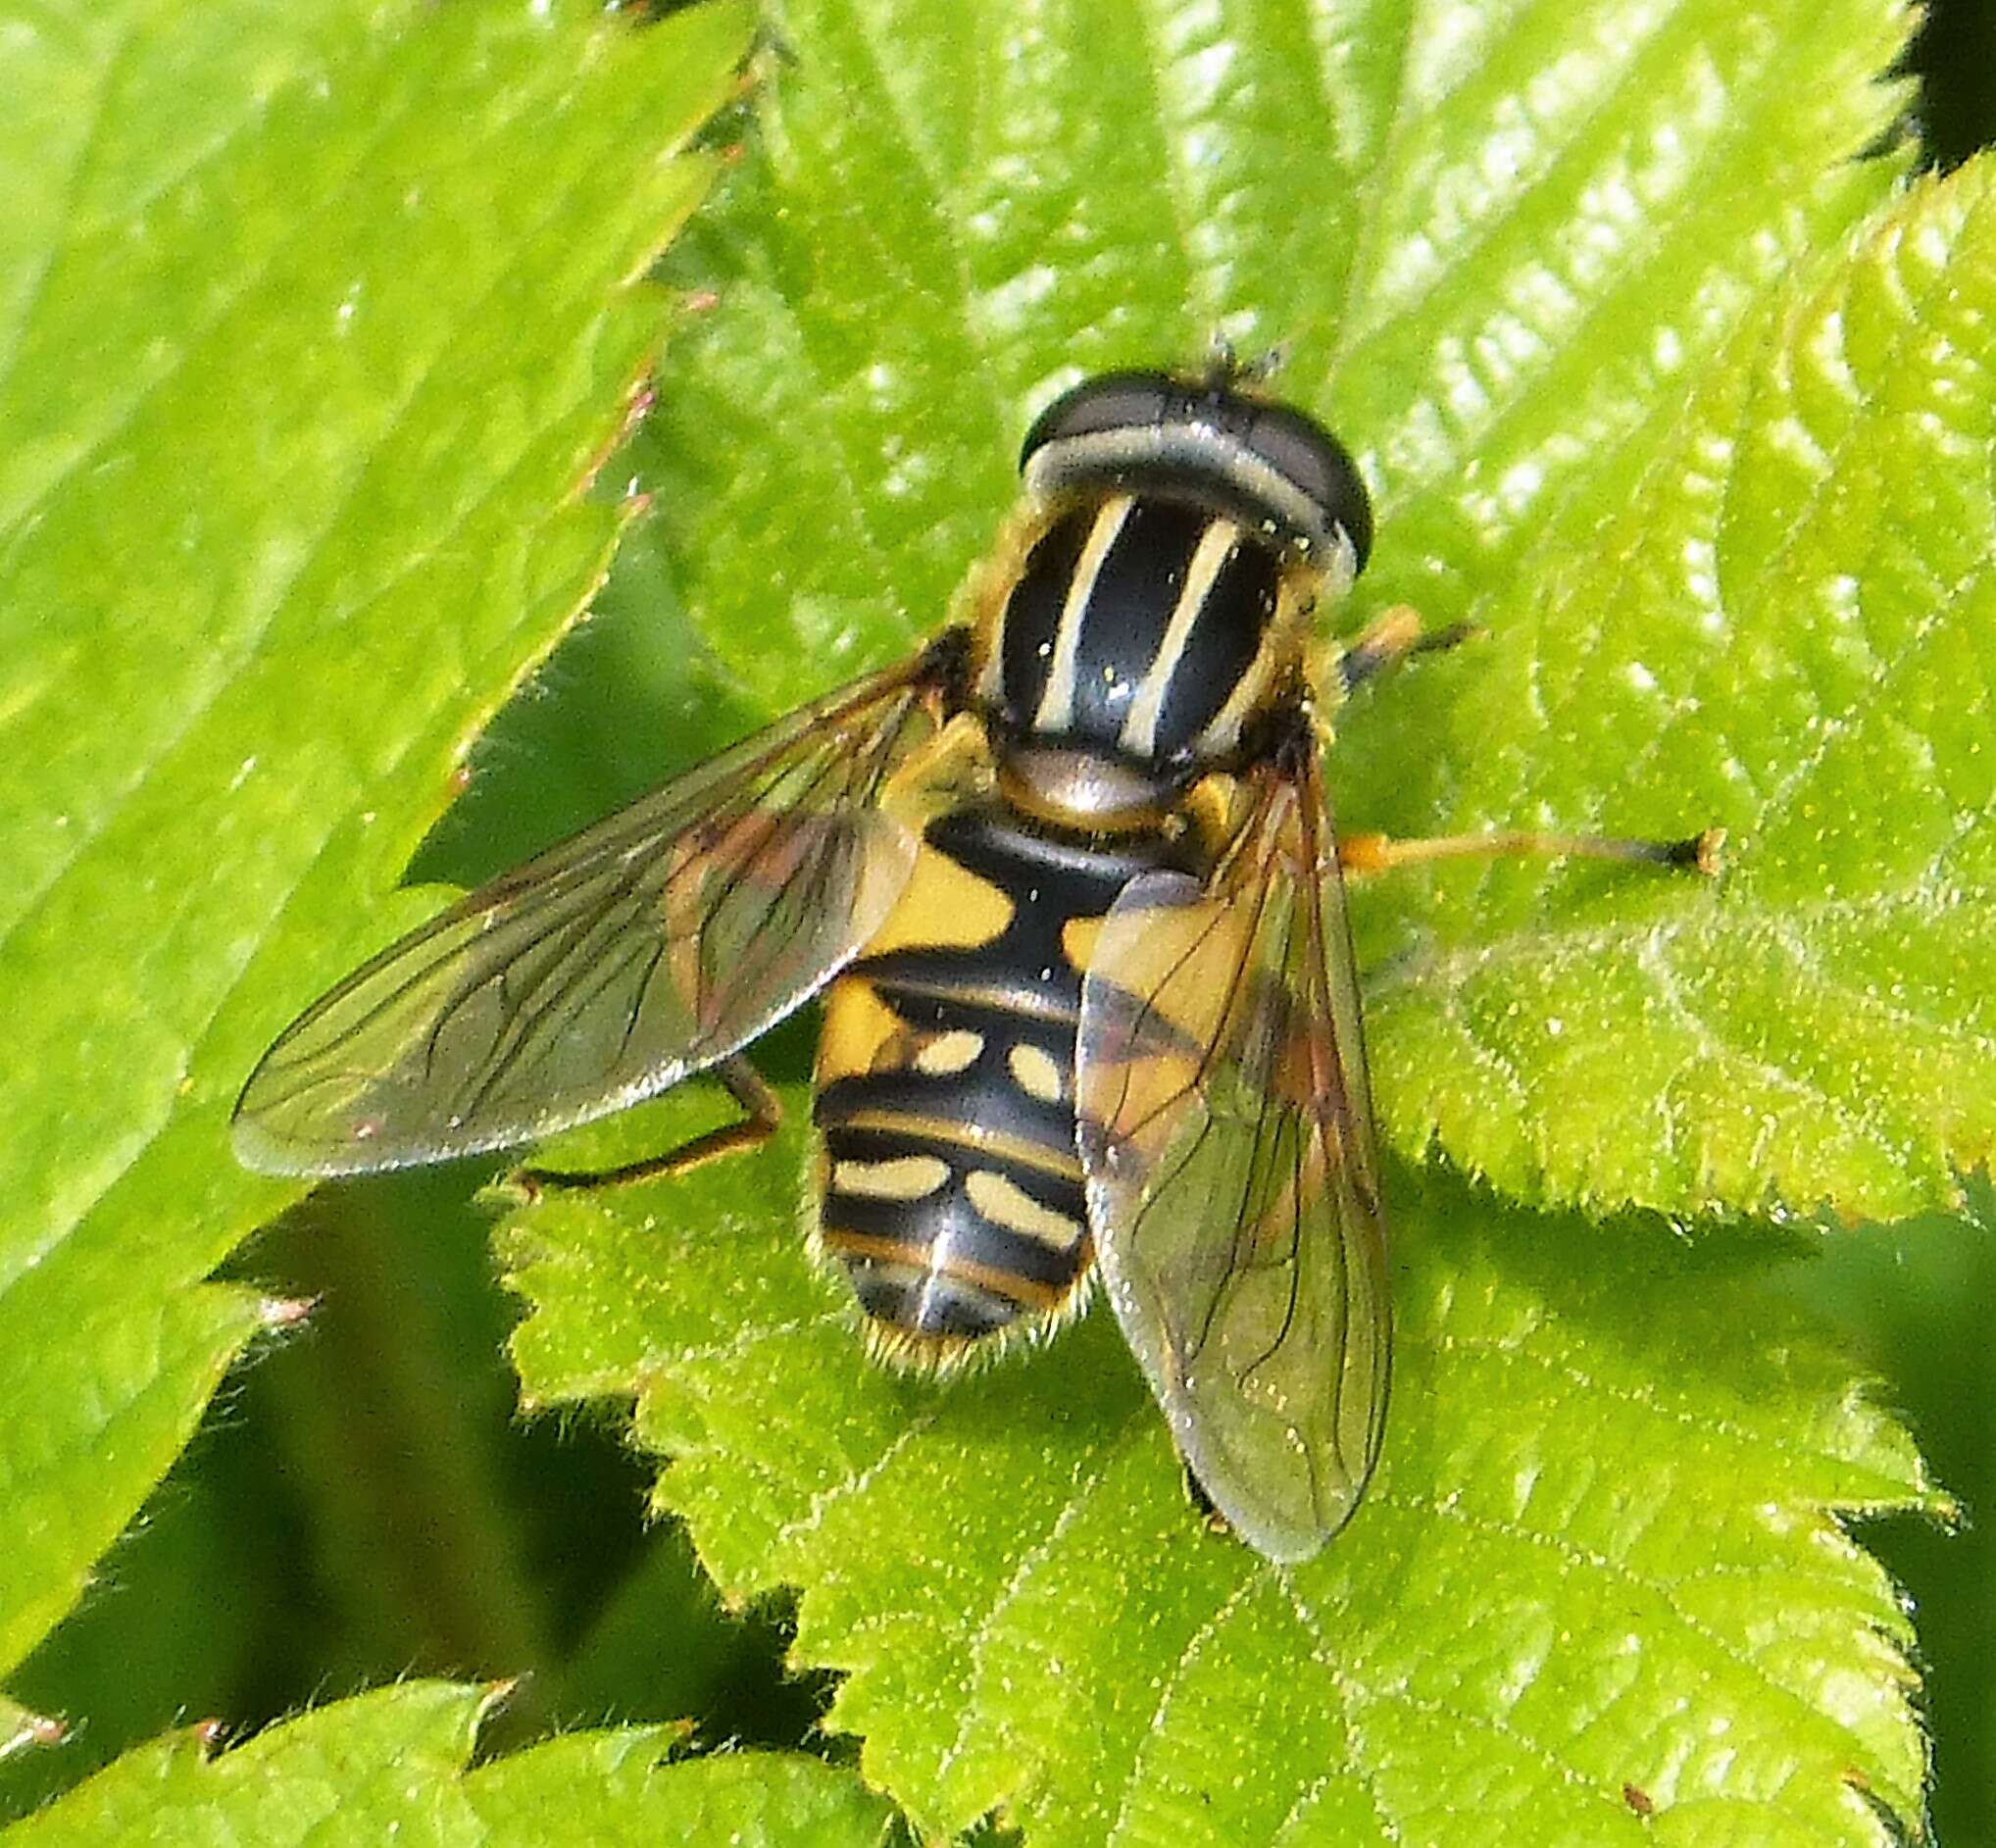 Image of Marsh Hoverfly